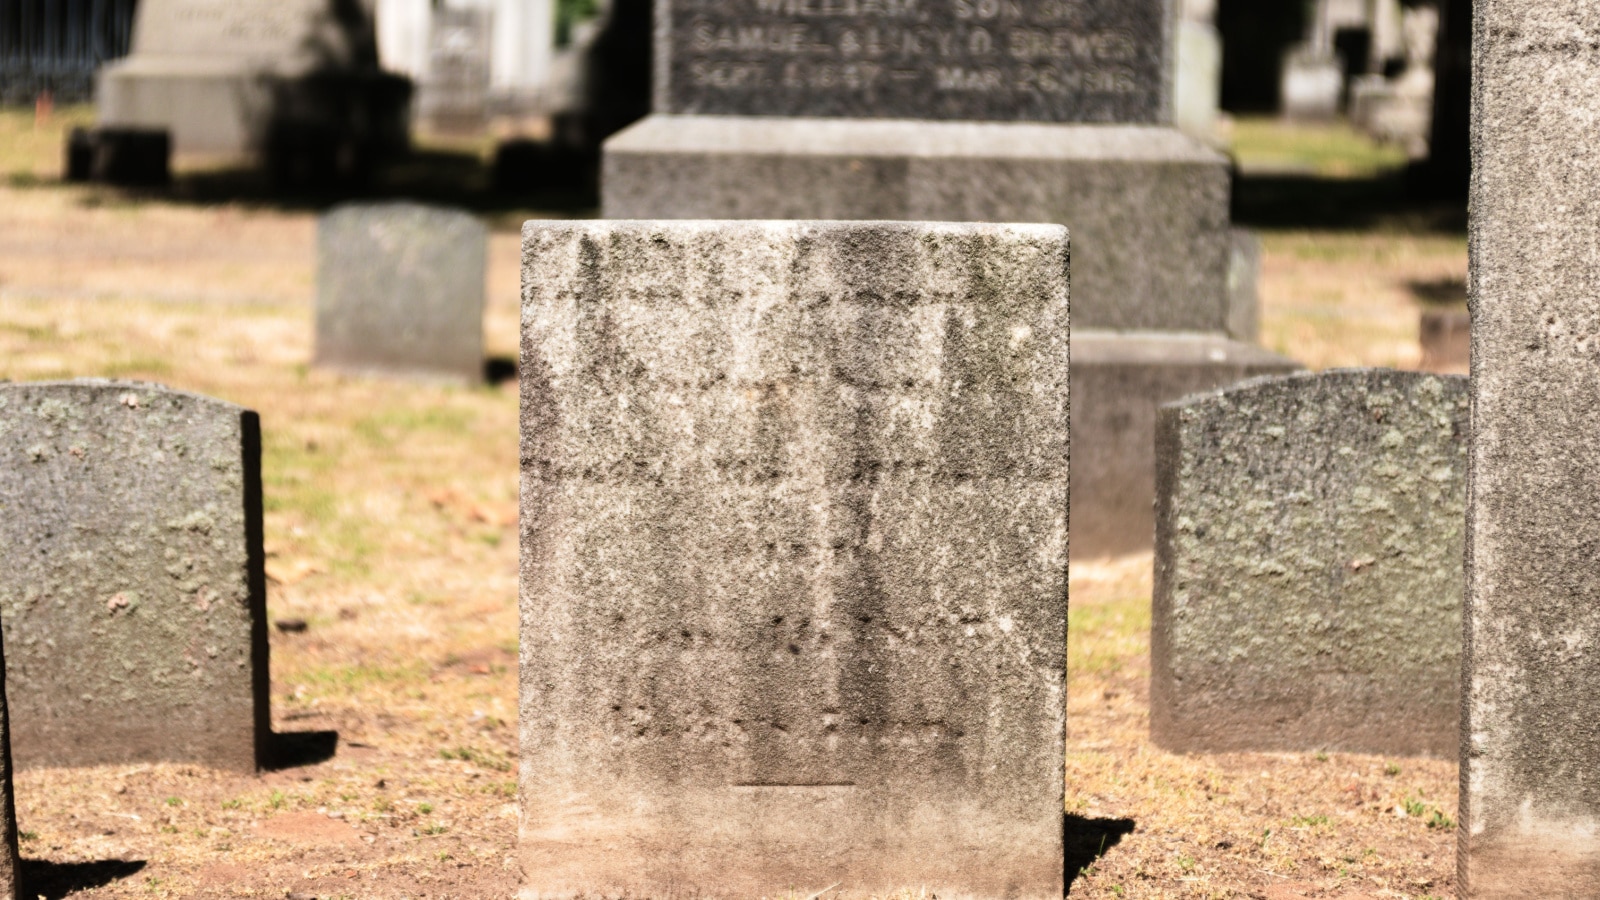 Photo of a very old, vintage, antique tombstone (headstone) at the historic Grove Street Cemetery, one of the oldest burial grounds in New Haven, Connecticut, USA.